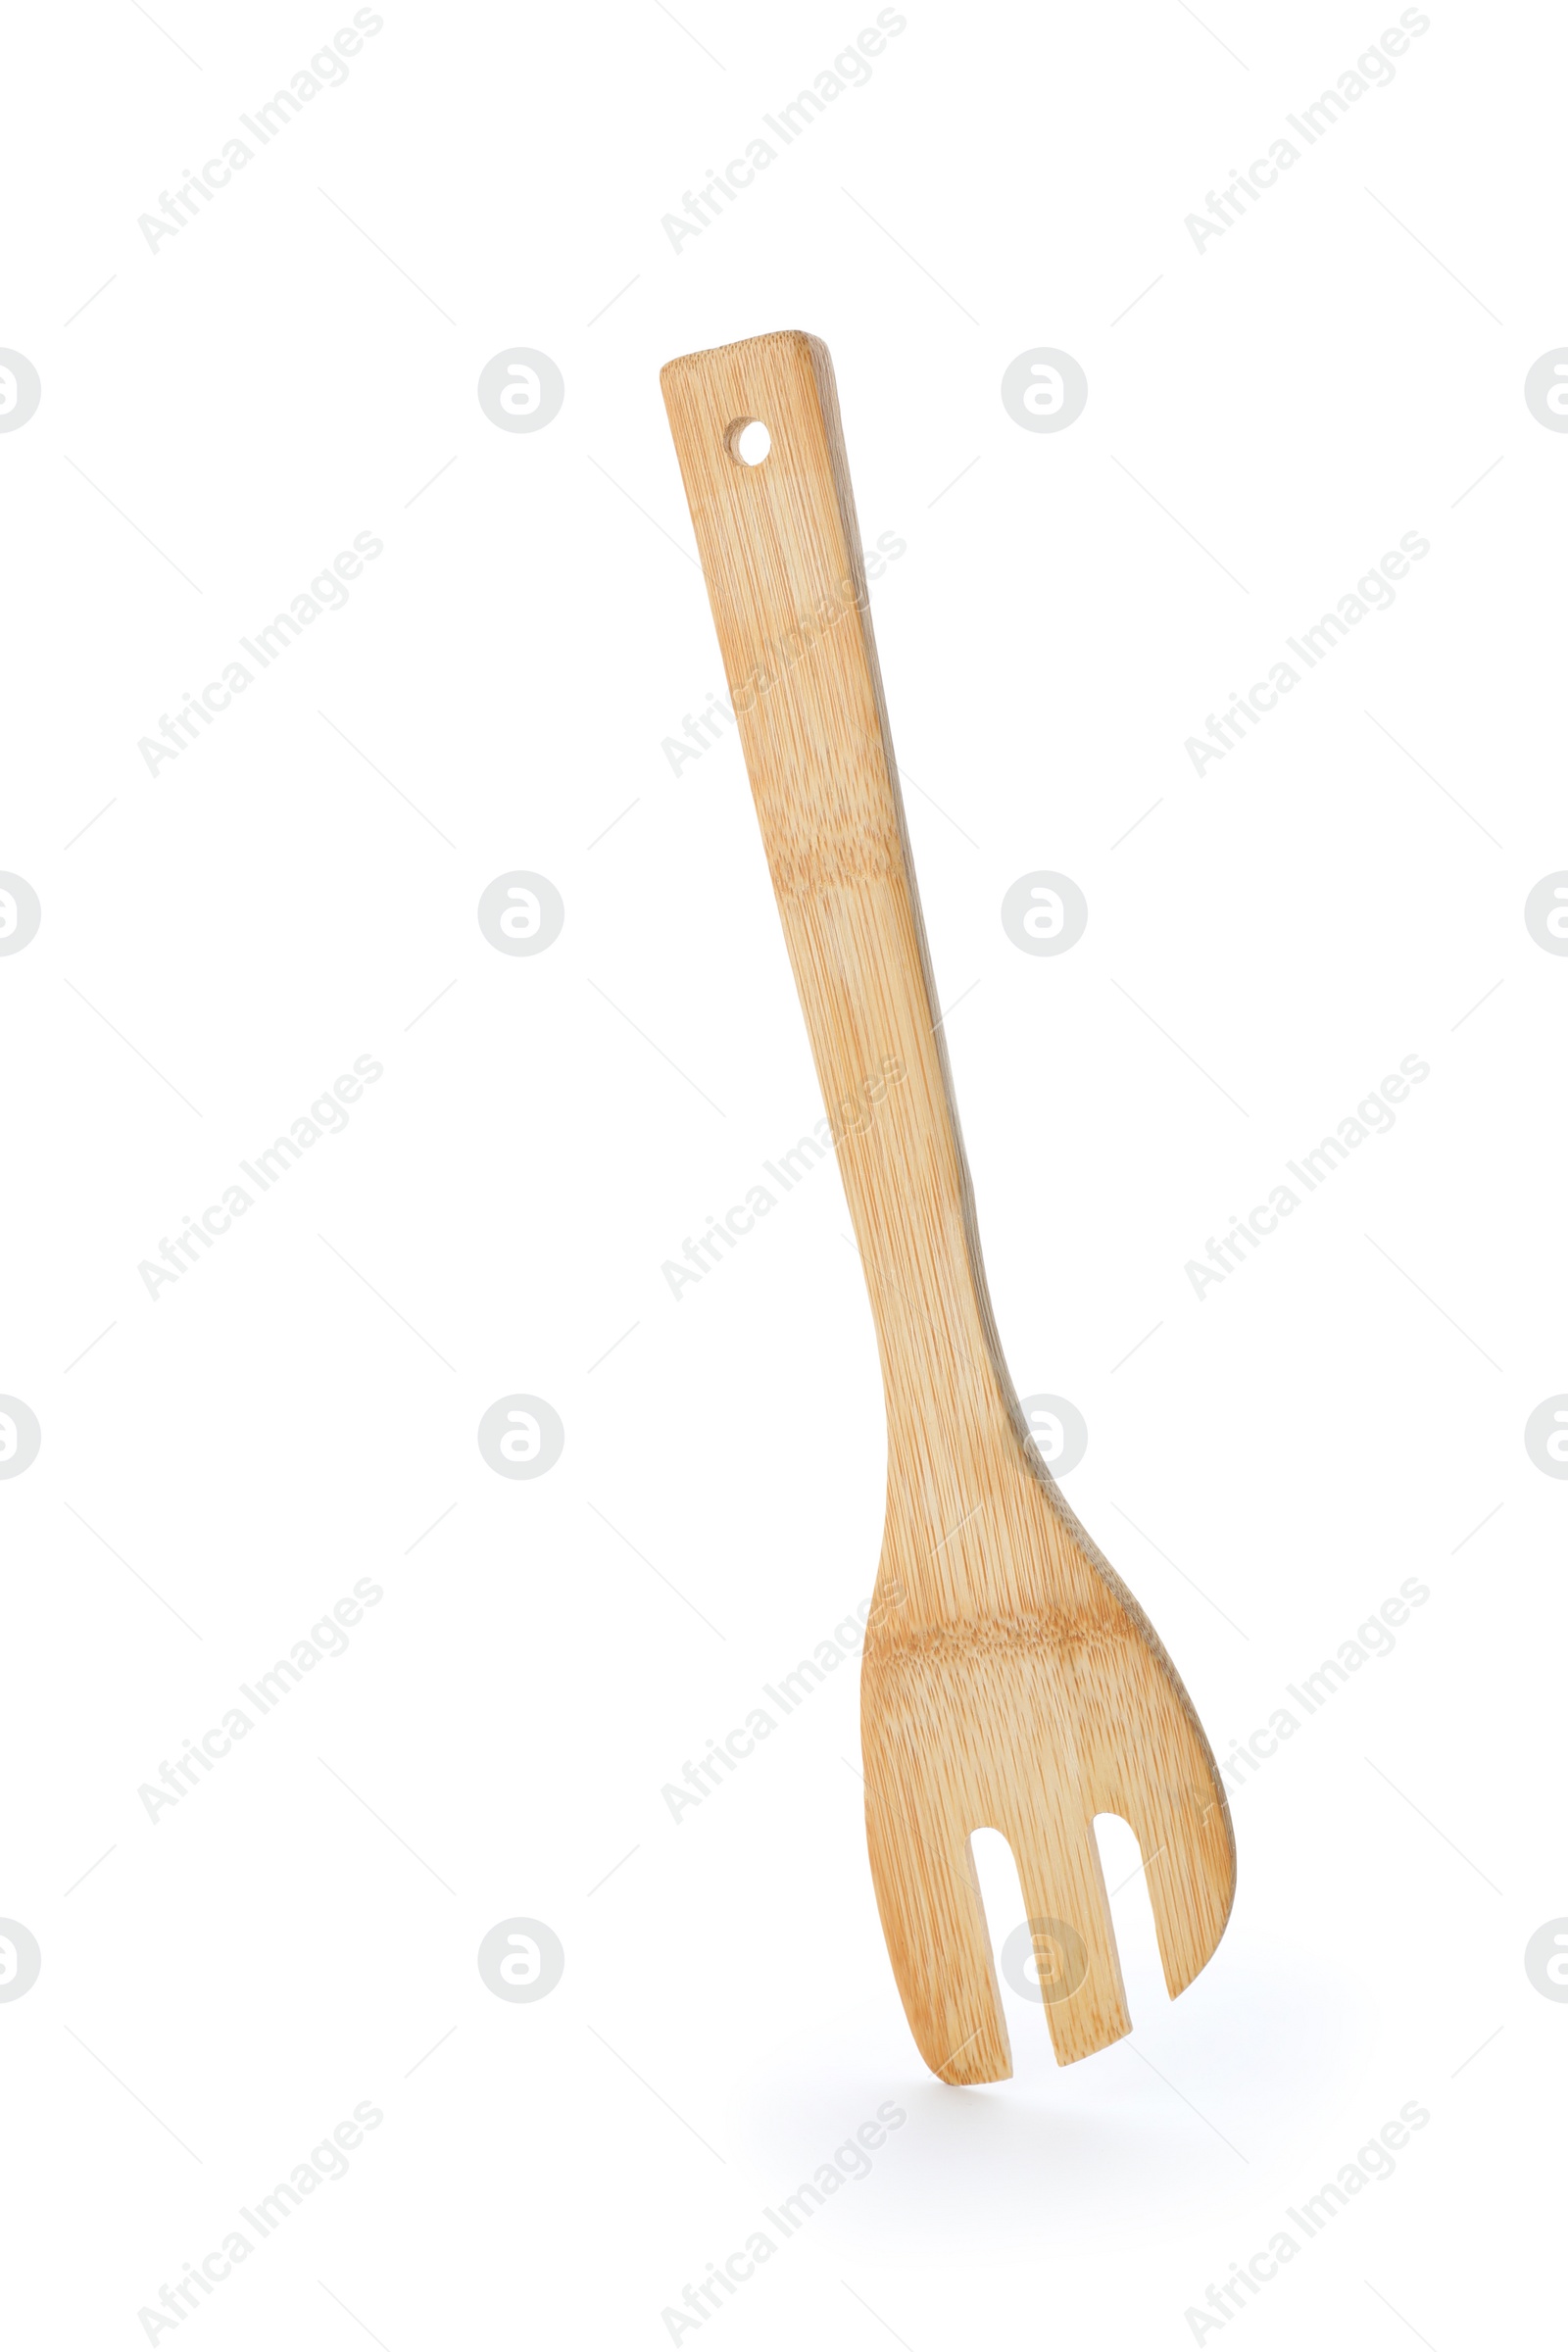 Photo of Kitchen utensil made of bamboo on white background